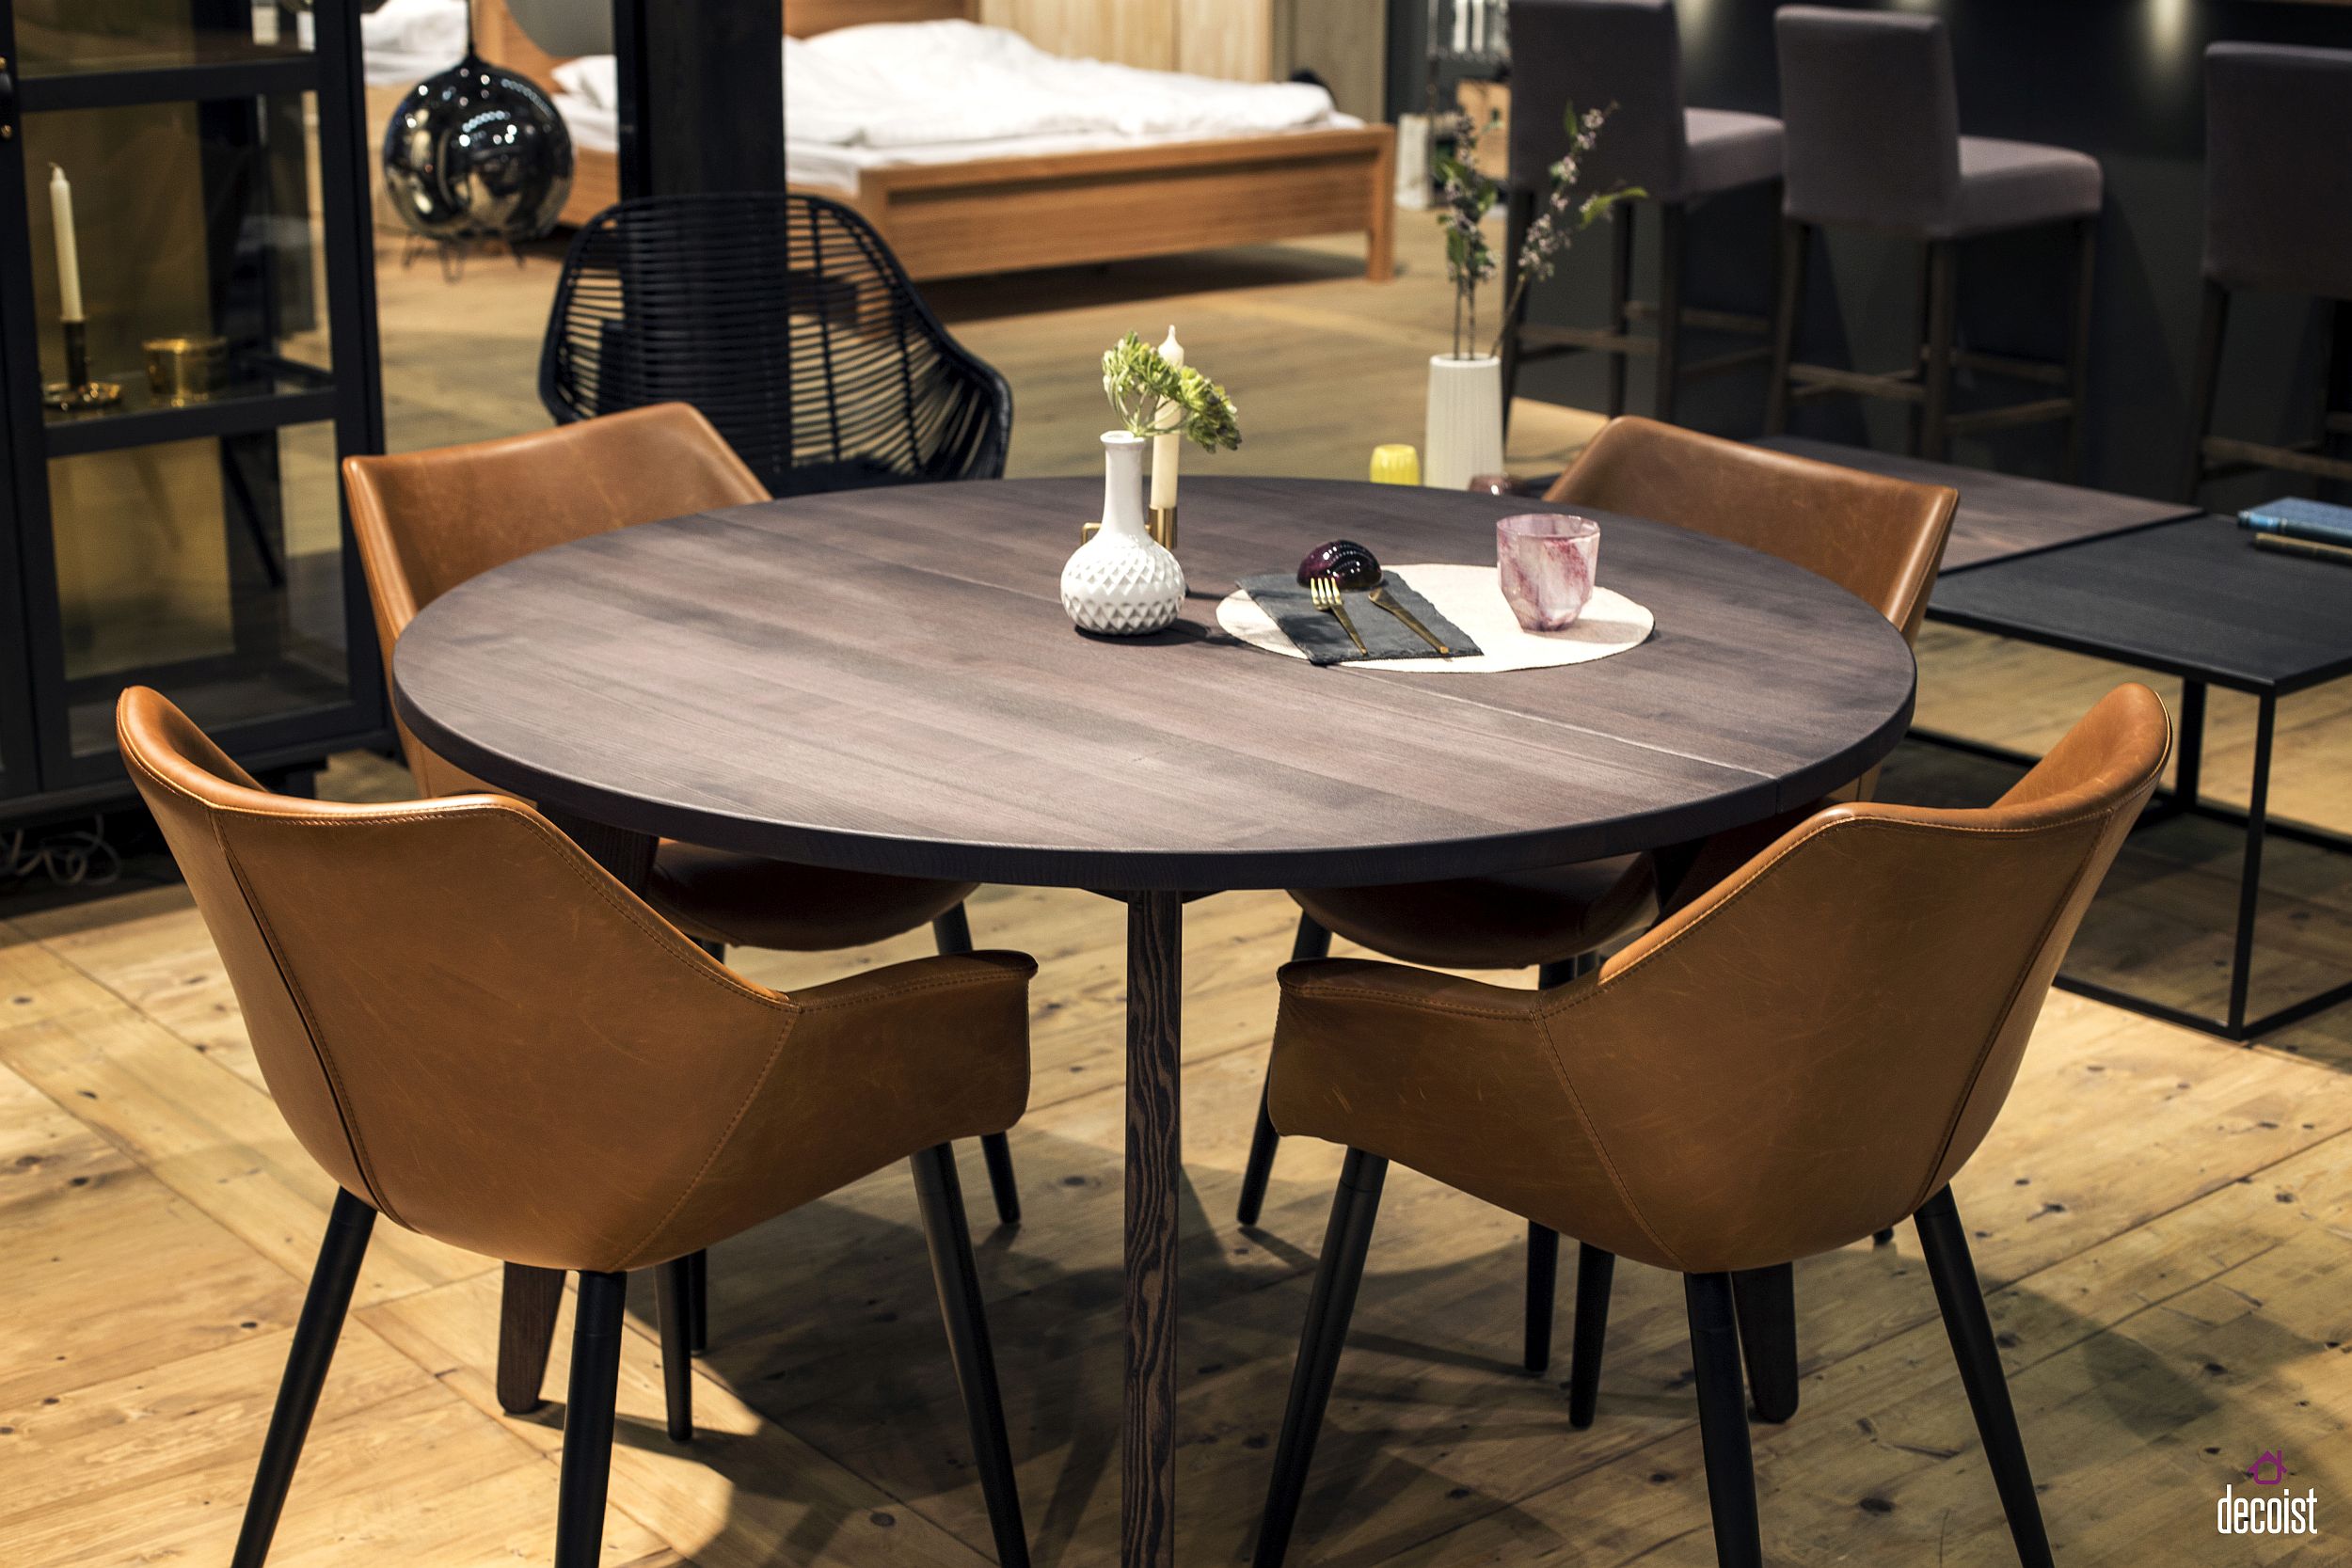 Wooden Tables To Brighten Your Dining Room, Dining Table Round Wooden